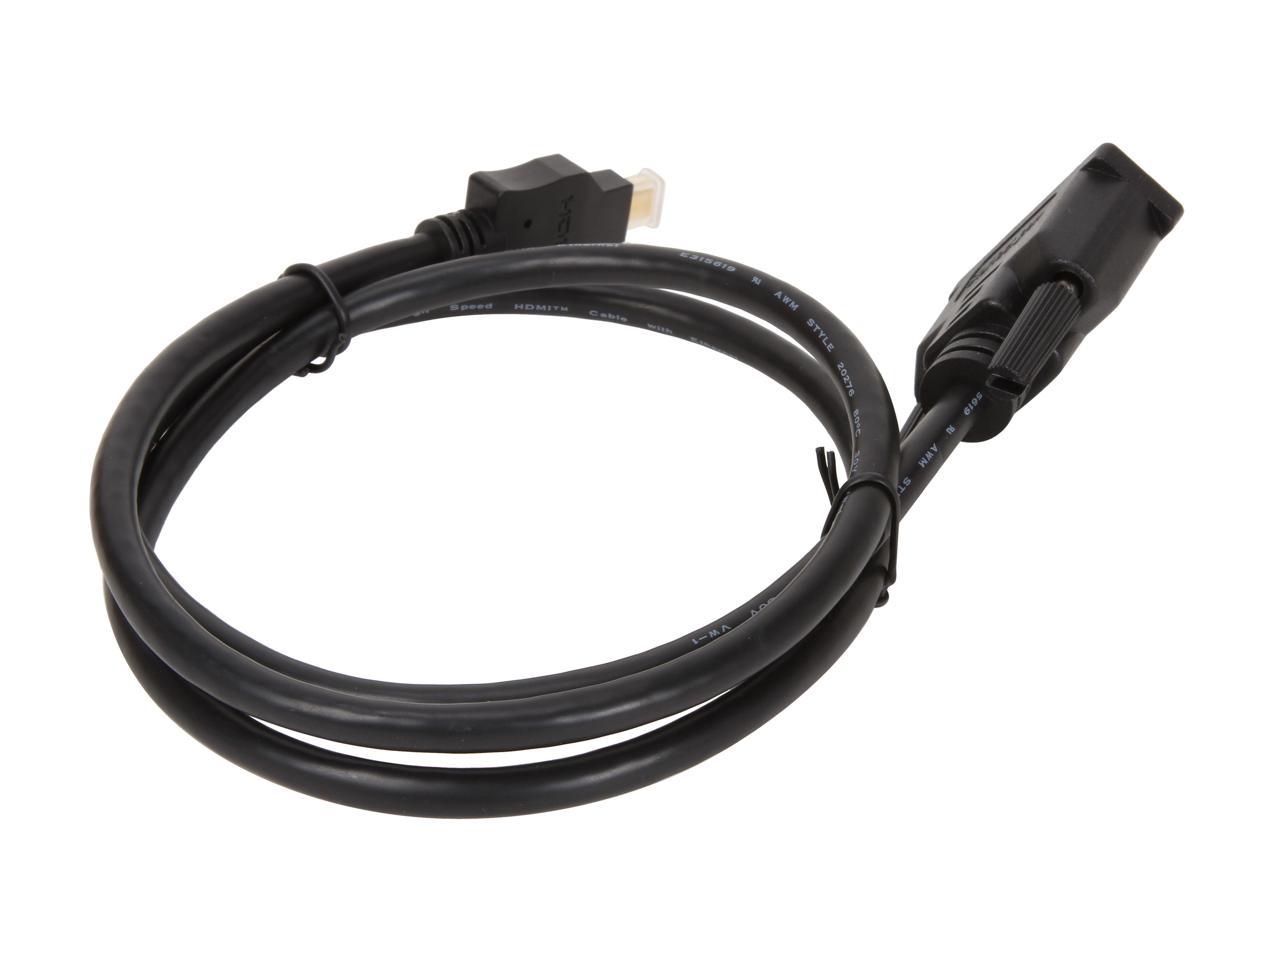 StarTech.com HDDDVIMM1M Black Micro HDMI (19 pin) Male to DVI-D (19 pin) Male to Male Cable - image 2 of 3